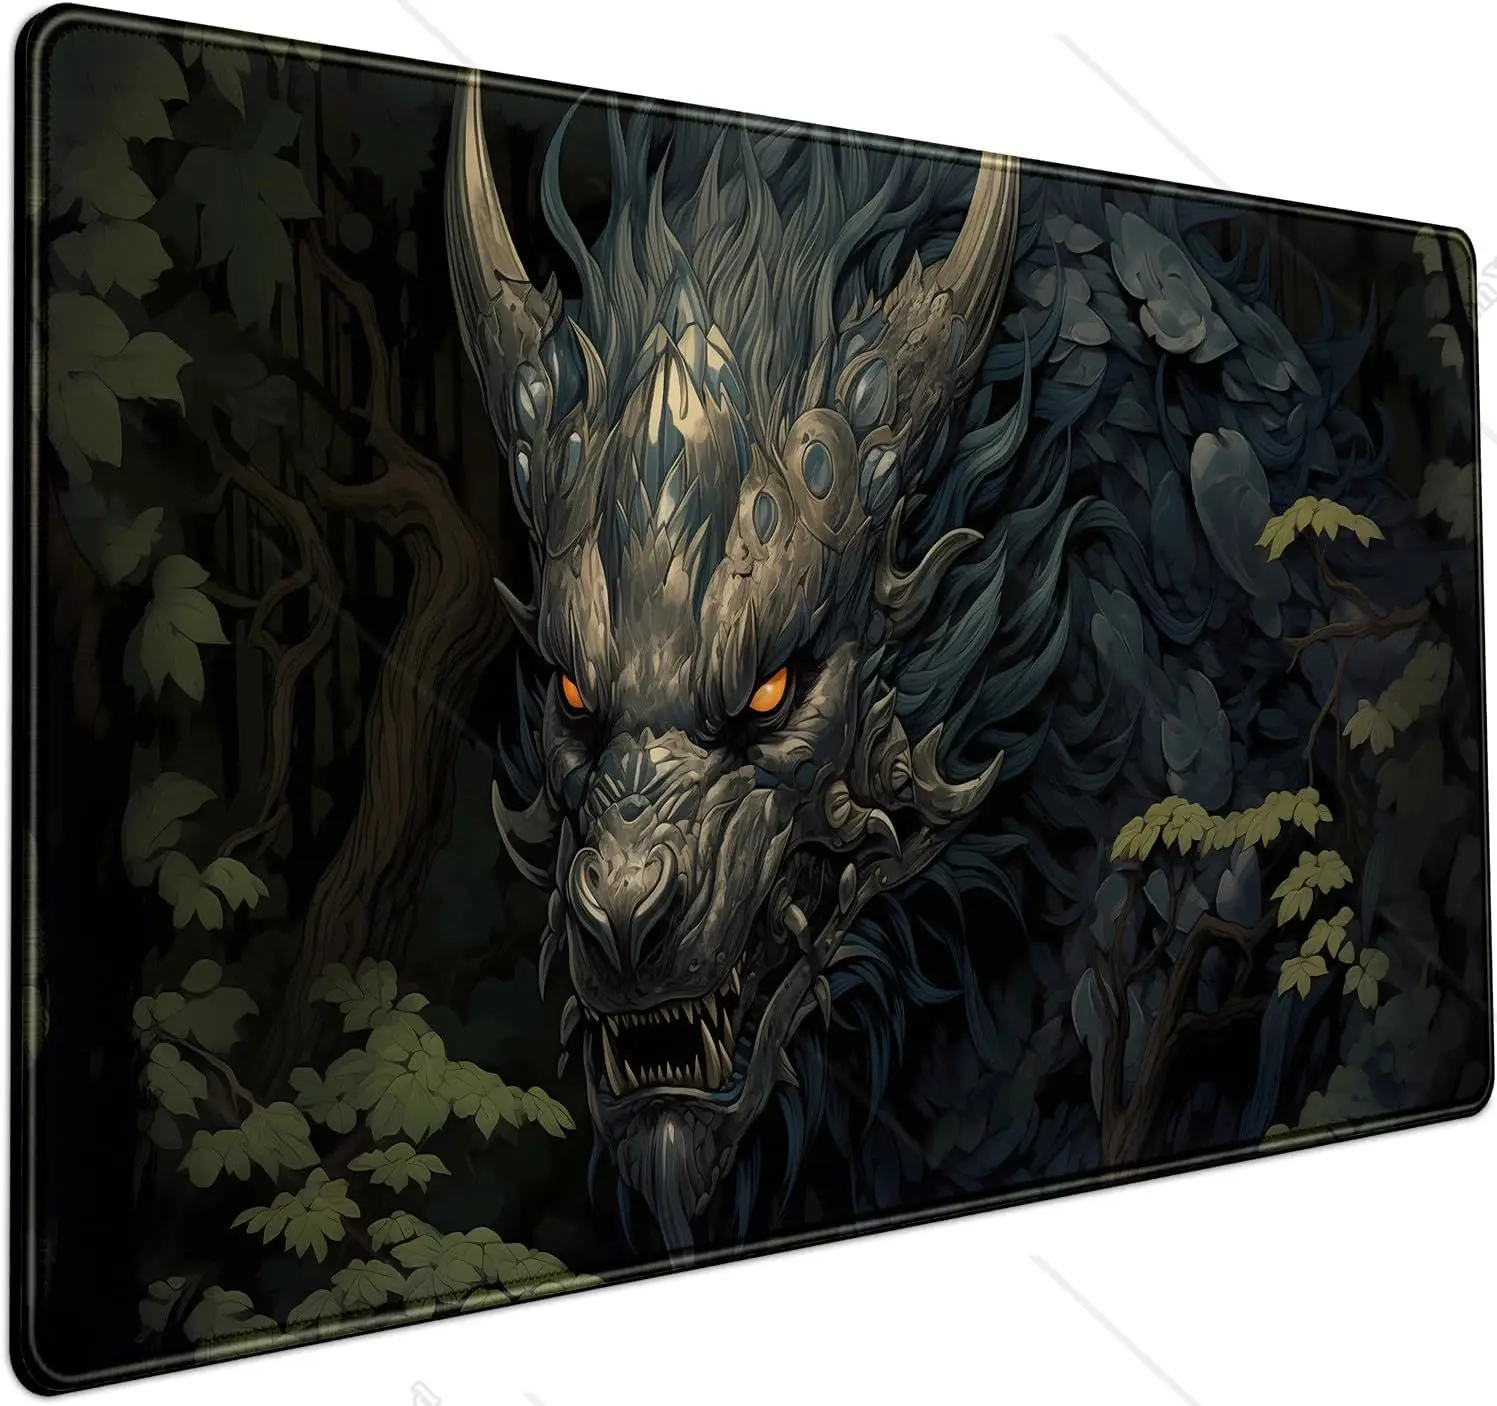 

Black Dragon Cool Anime Gaming Mouse Pad Large Home Office Decor with Stitched Edges Non-Slip Rubber Base 31.5x11.8 inch